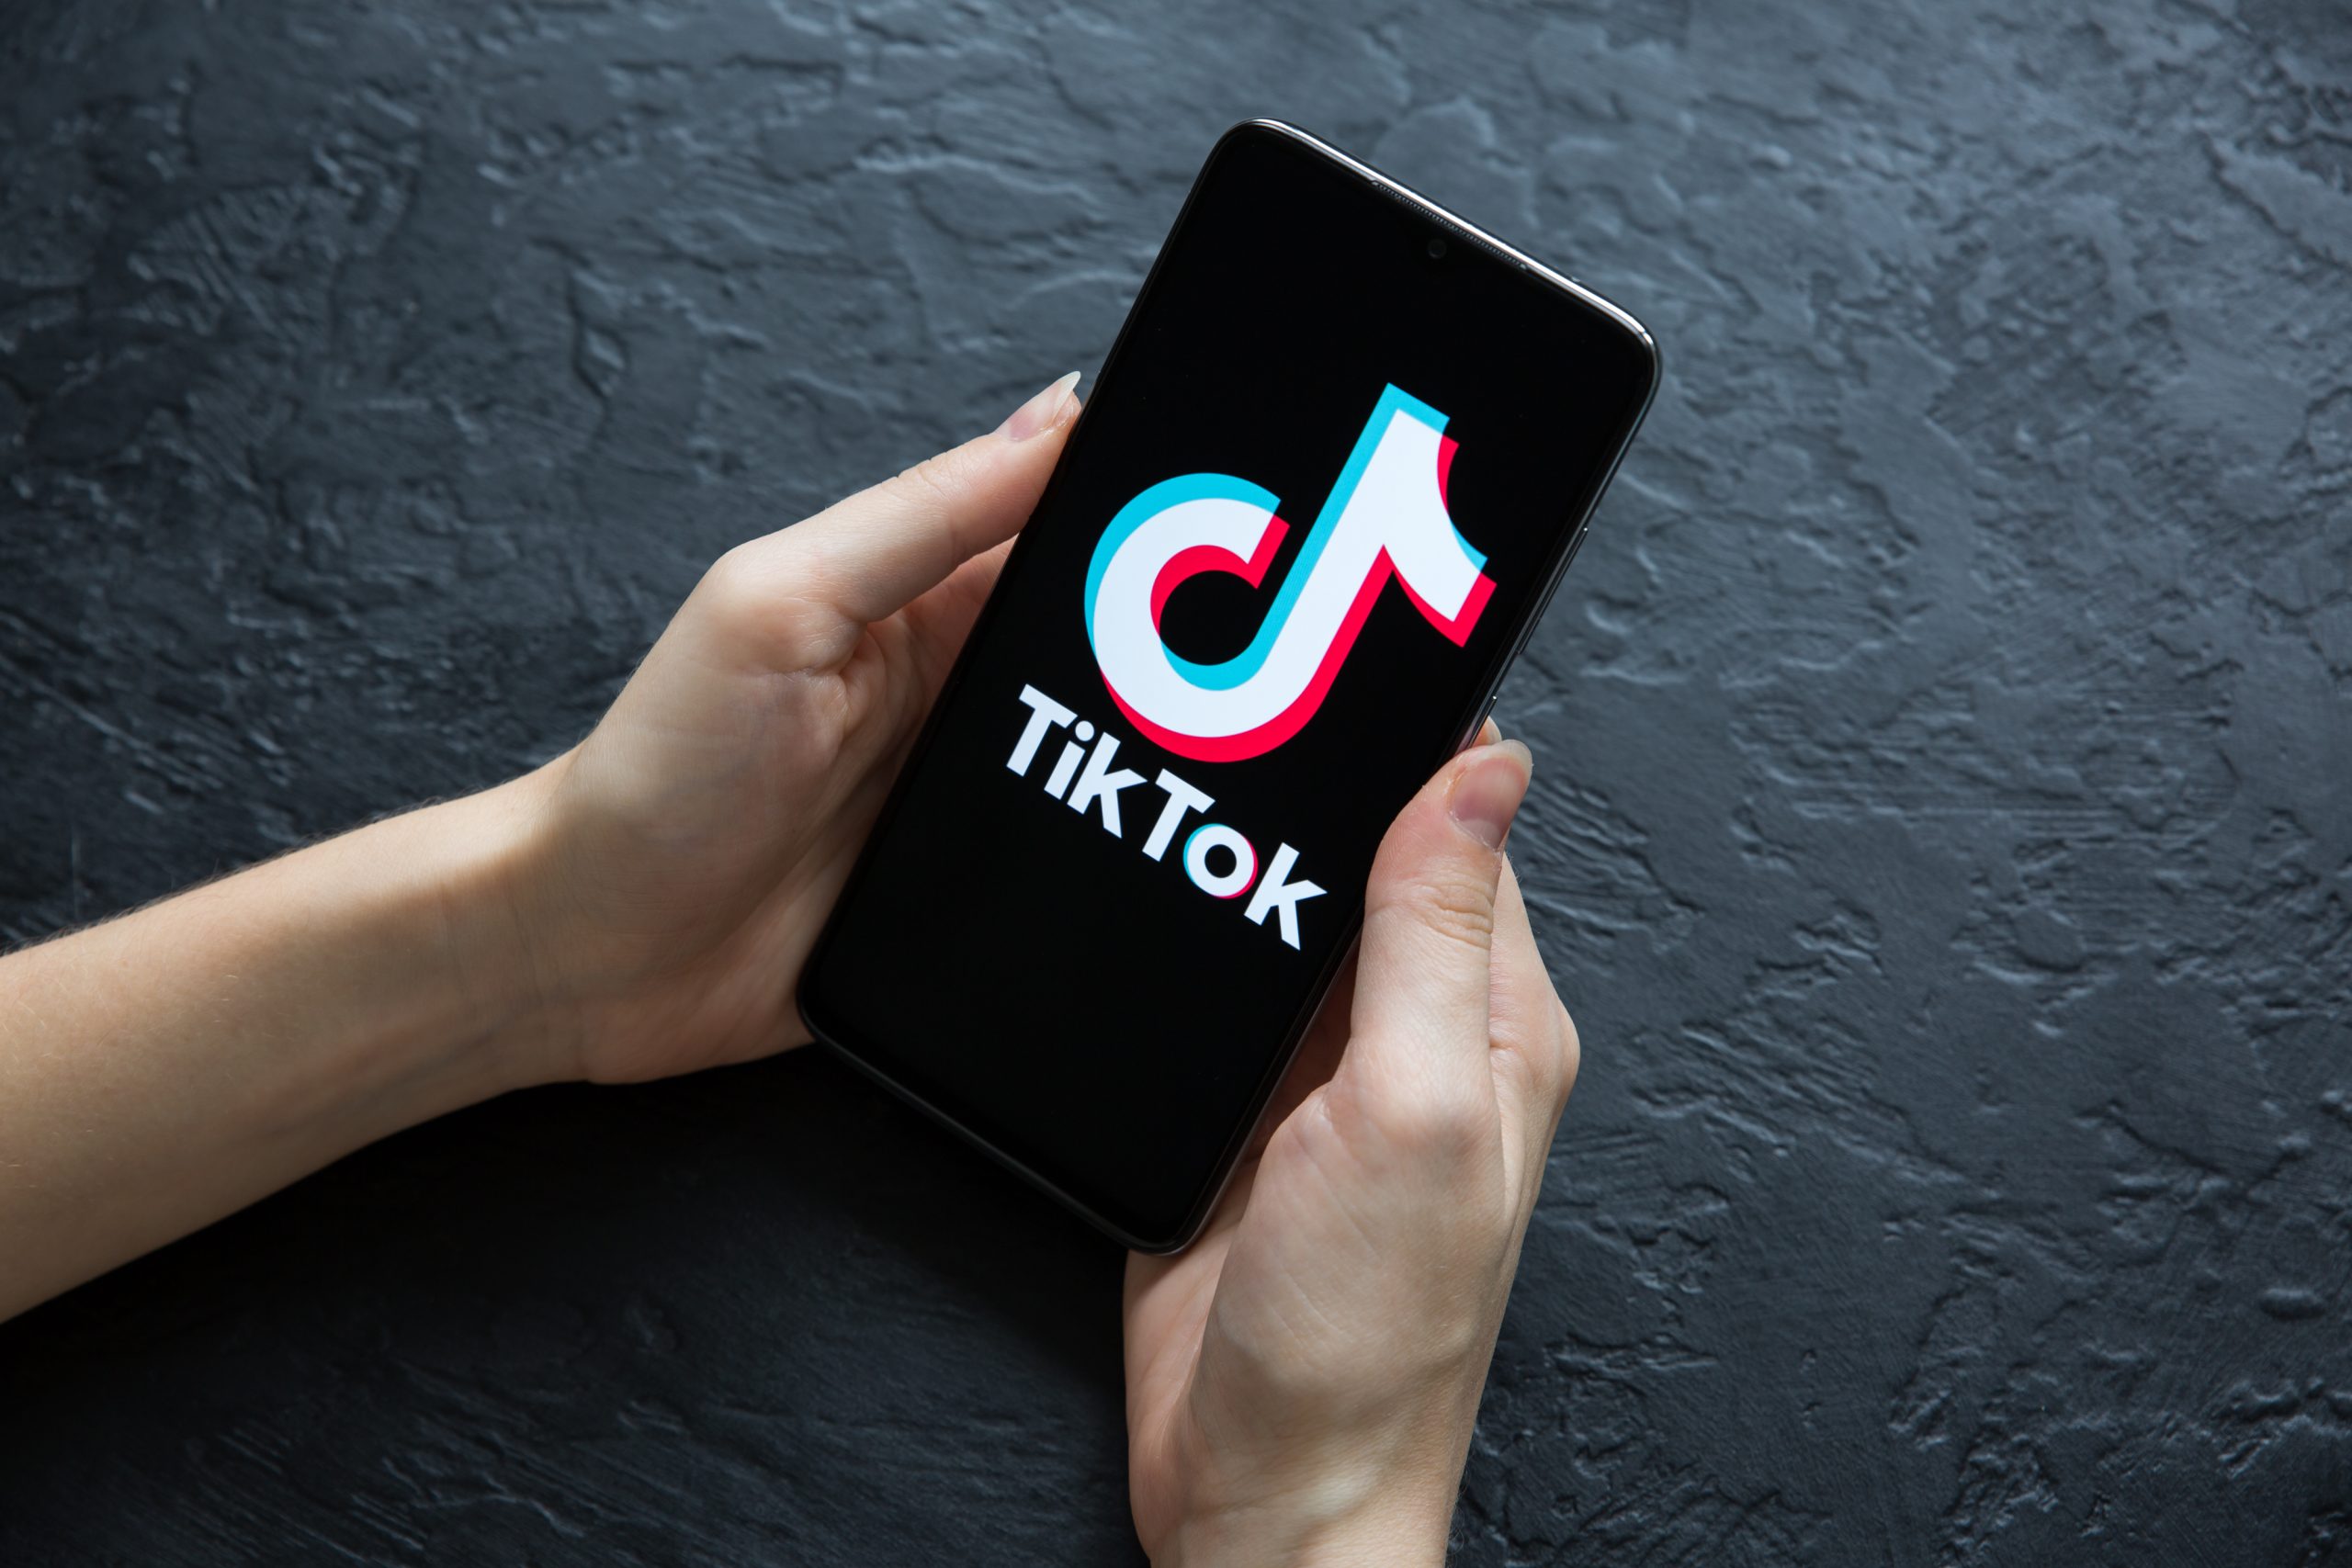 What gives Tiktok influencer culture an edge